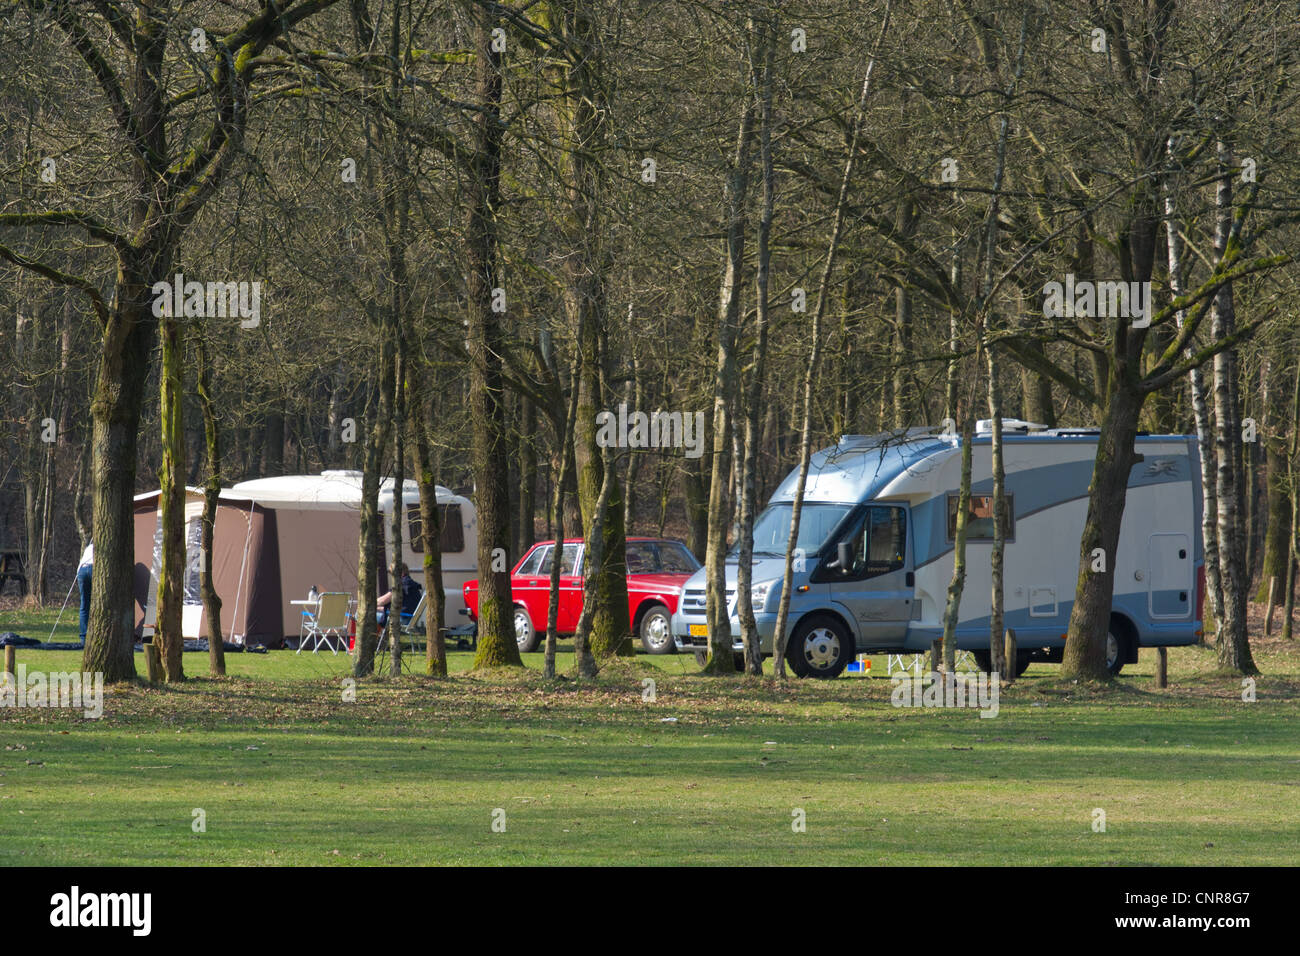 Day camping at Drakenstein 'De Kuil' in Lage Vuursche Stock Photo